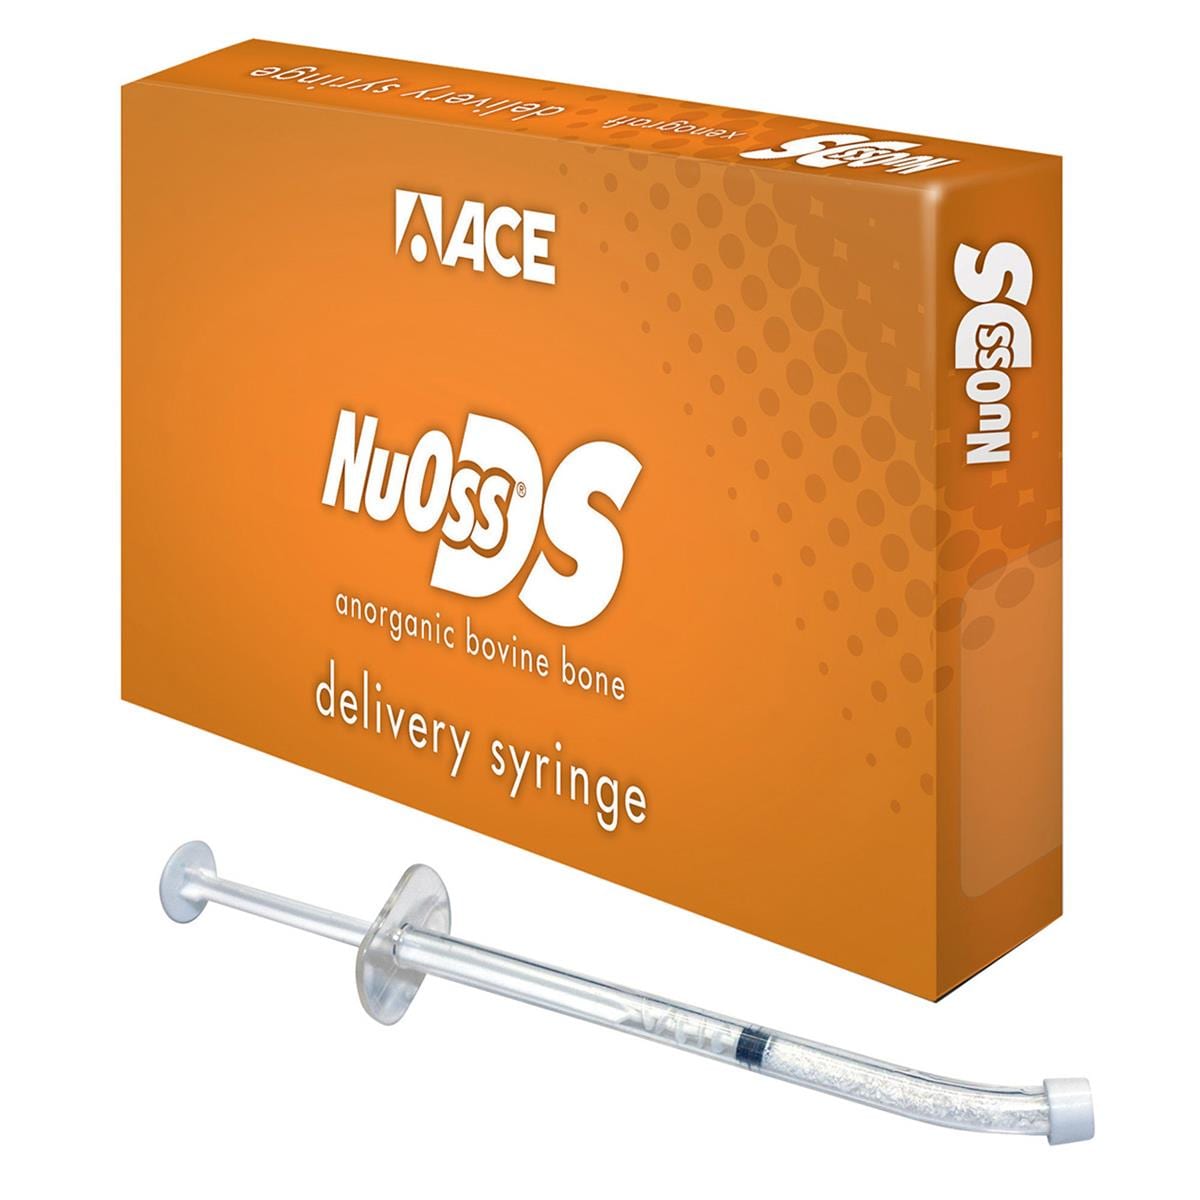 NuOss DS Delivery Syringe 0.25-1mm 0.25cc